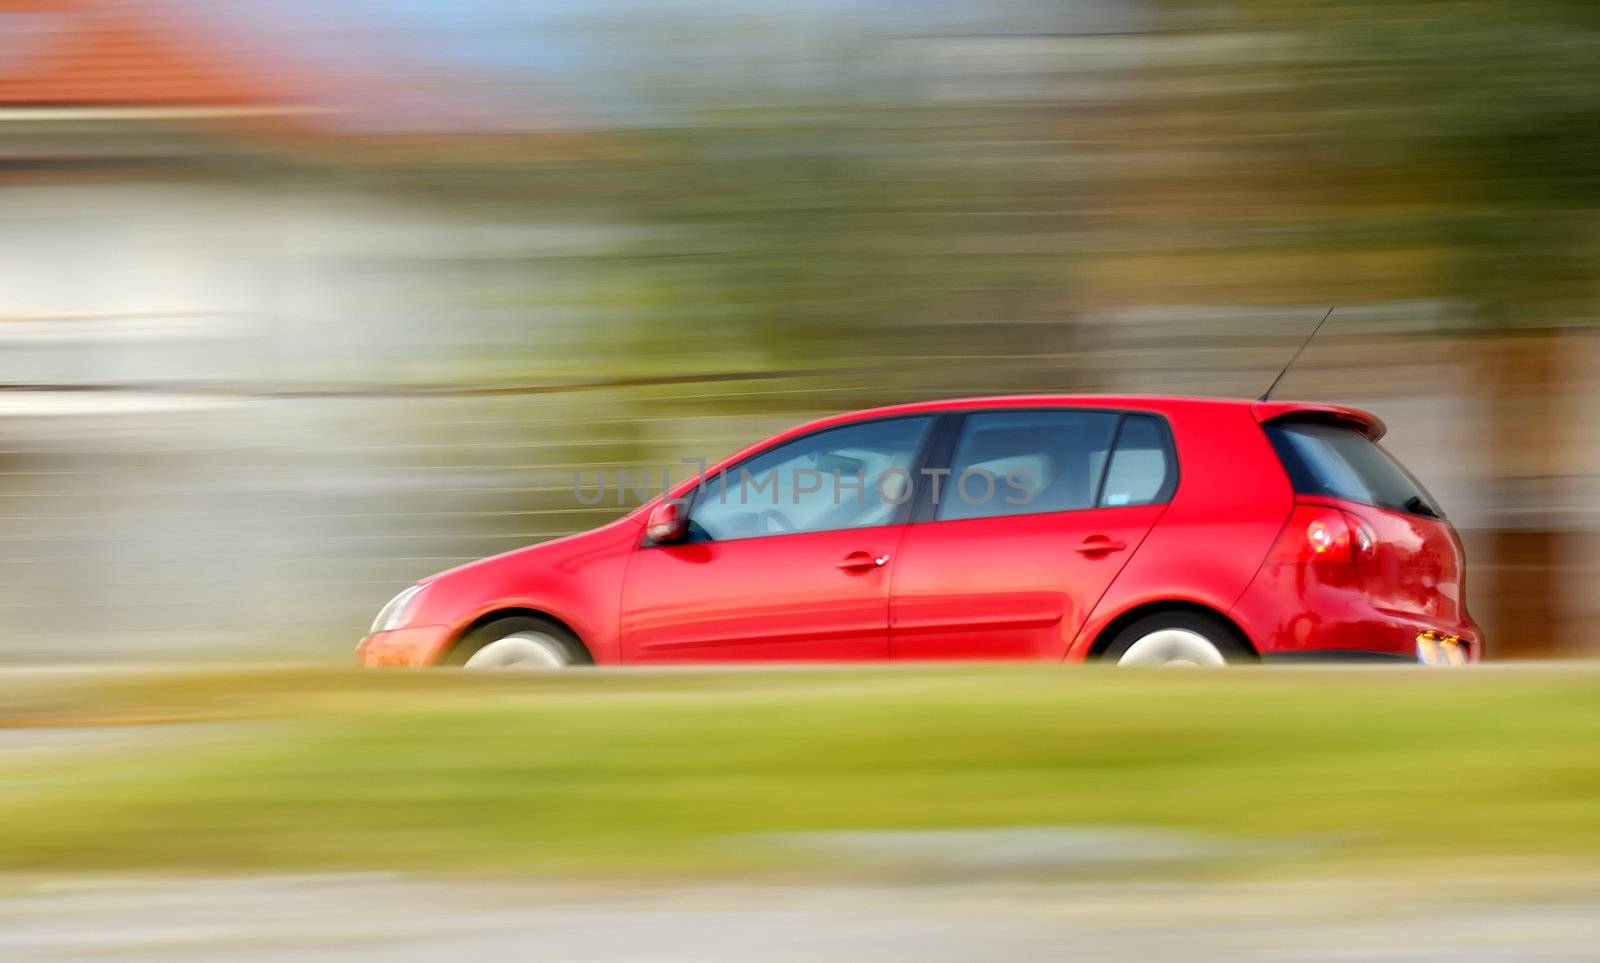 This is a panning shot of a fast moving red small car